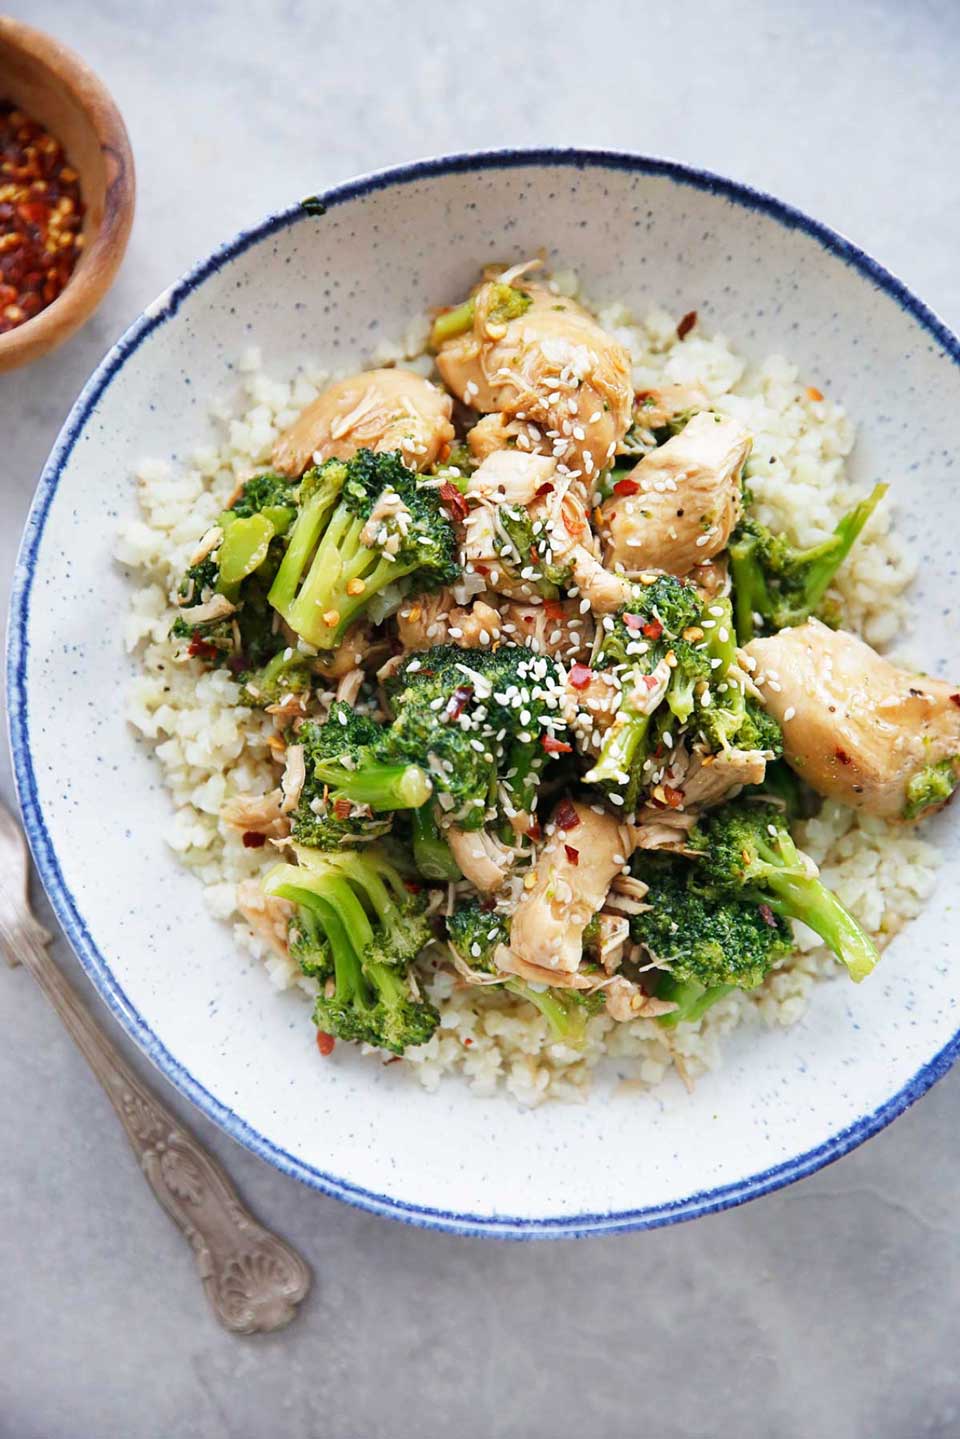 Paleo Chicken and Broccoli from Lexi at Lexi's Clean Kitchen is just one of the easy, healthy dinner ideas in our droolworthy list of Instant Pot Chicken recipes! Be sure to check out all of them!